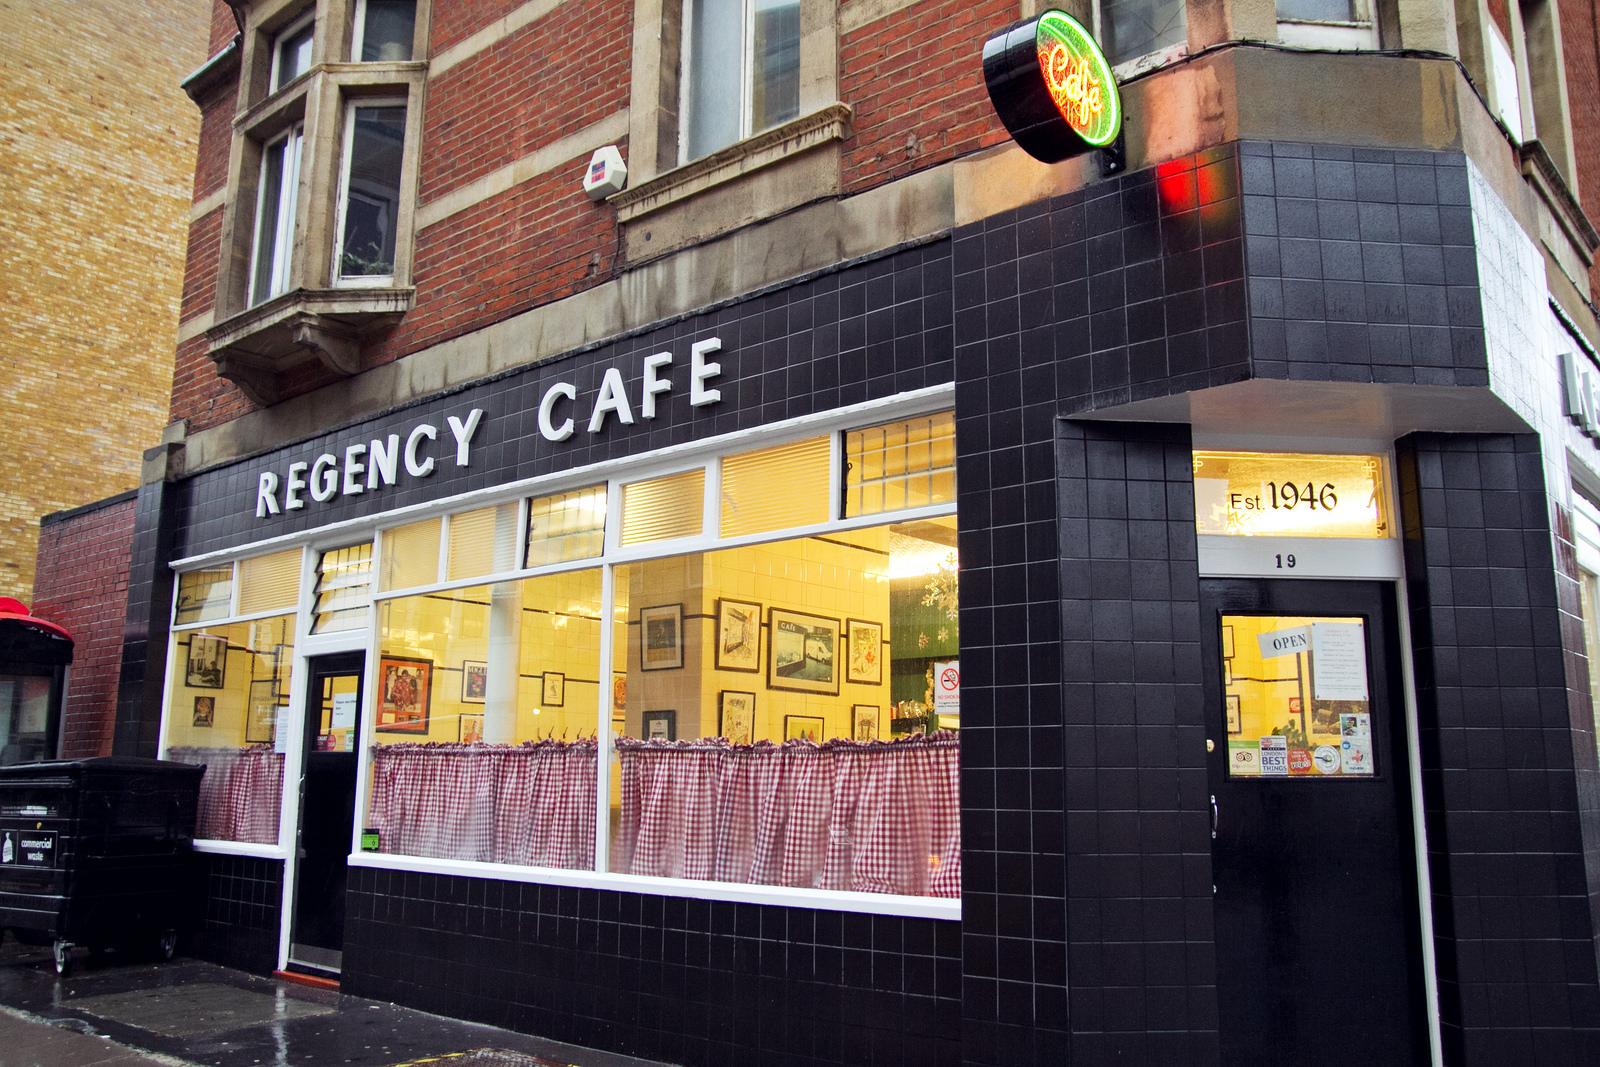 Cover image of this place Regency Cafe